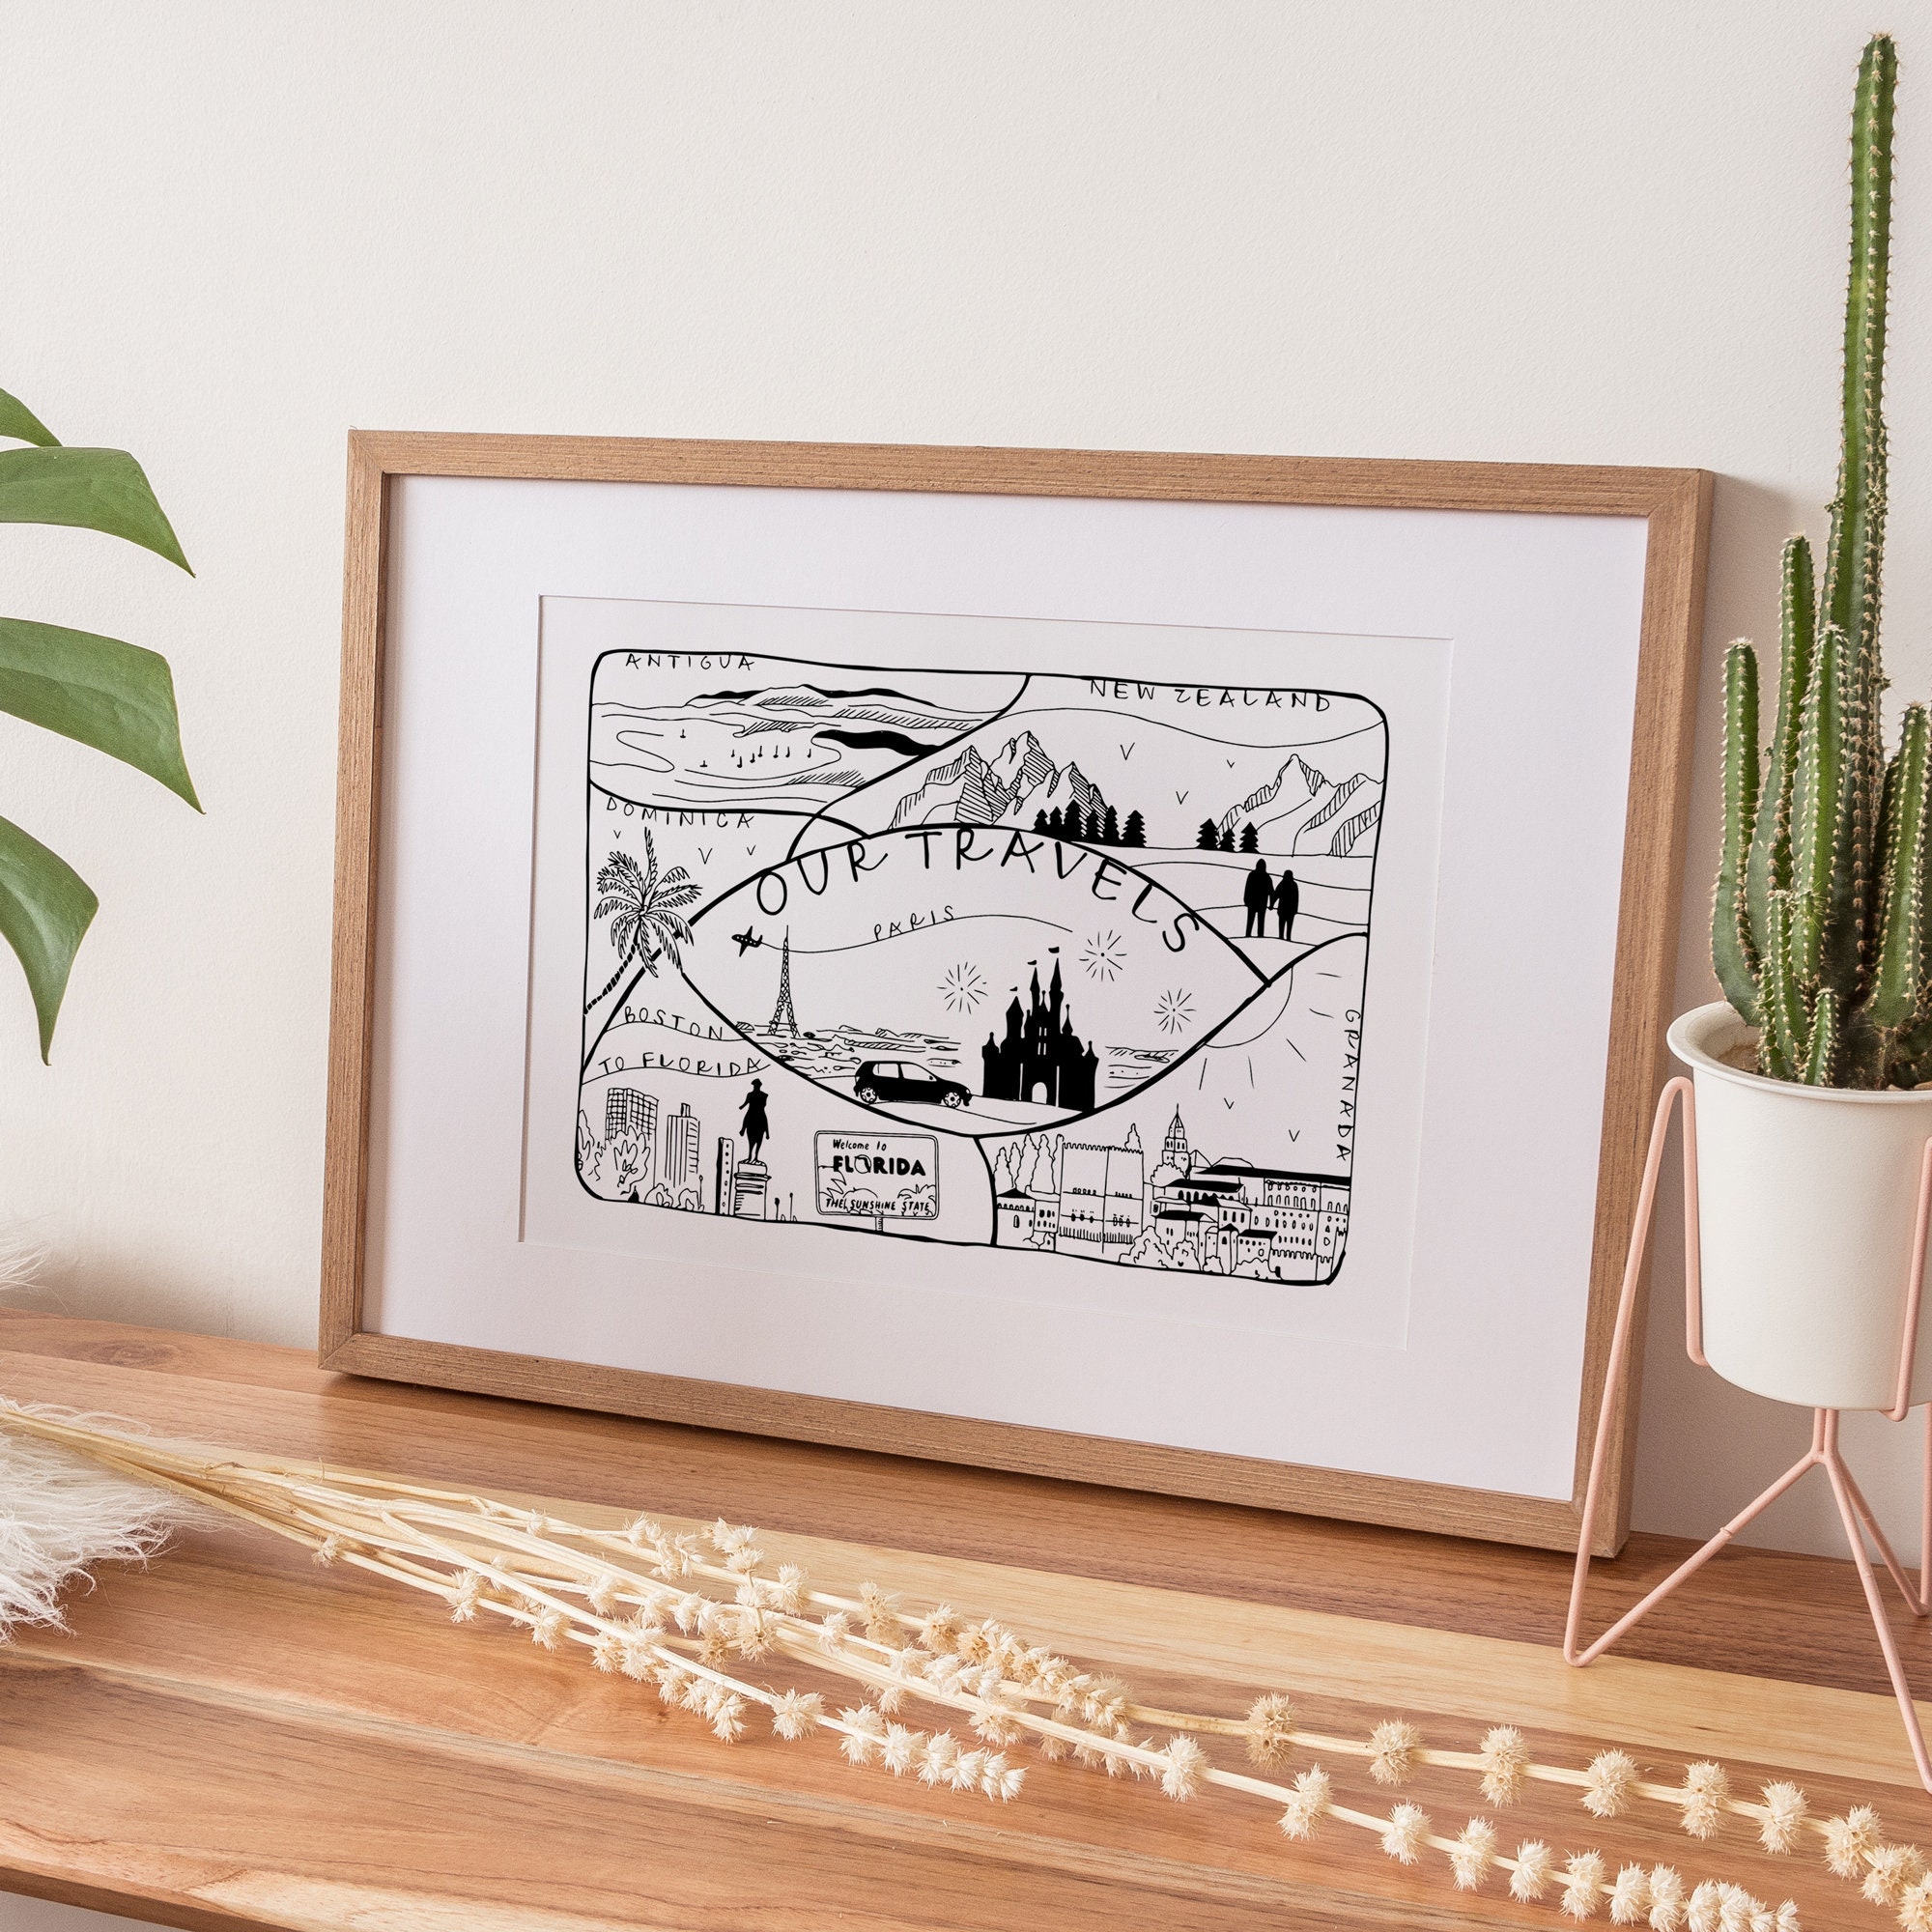 Travel Prints as Inspiration and Memorabilia for Cherished